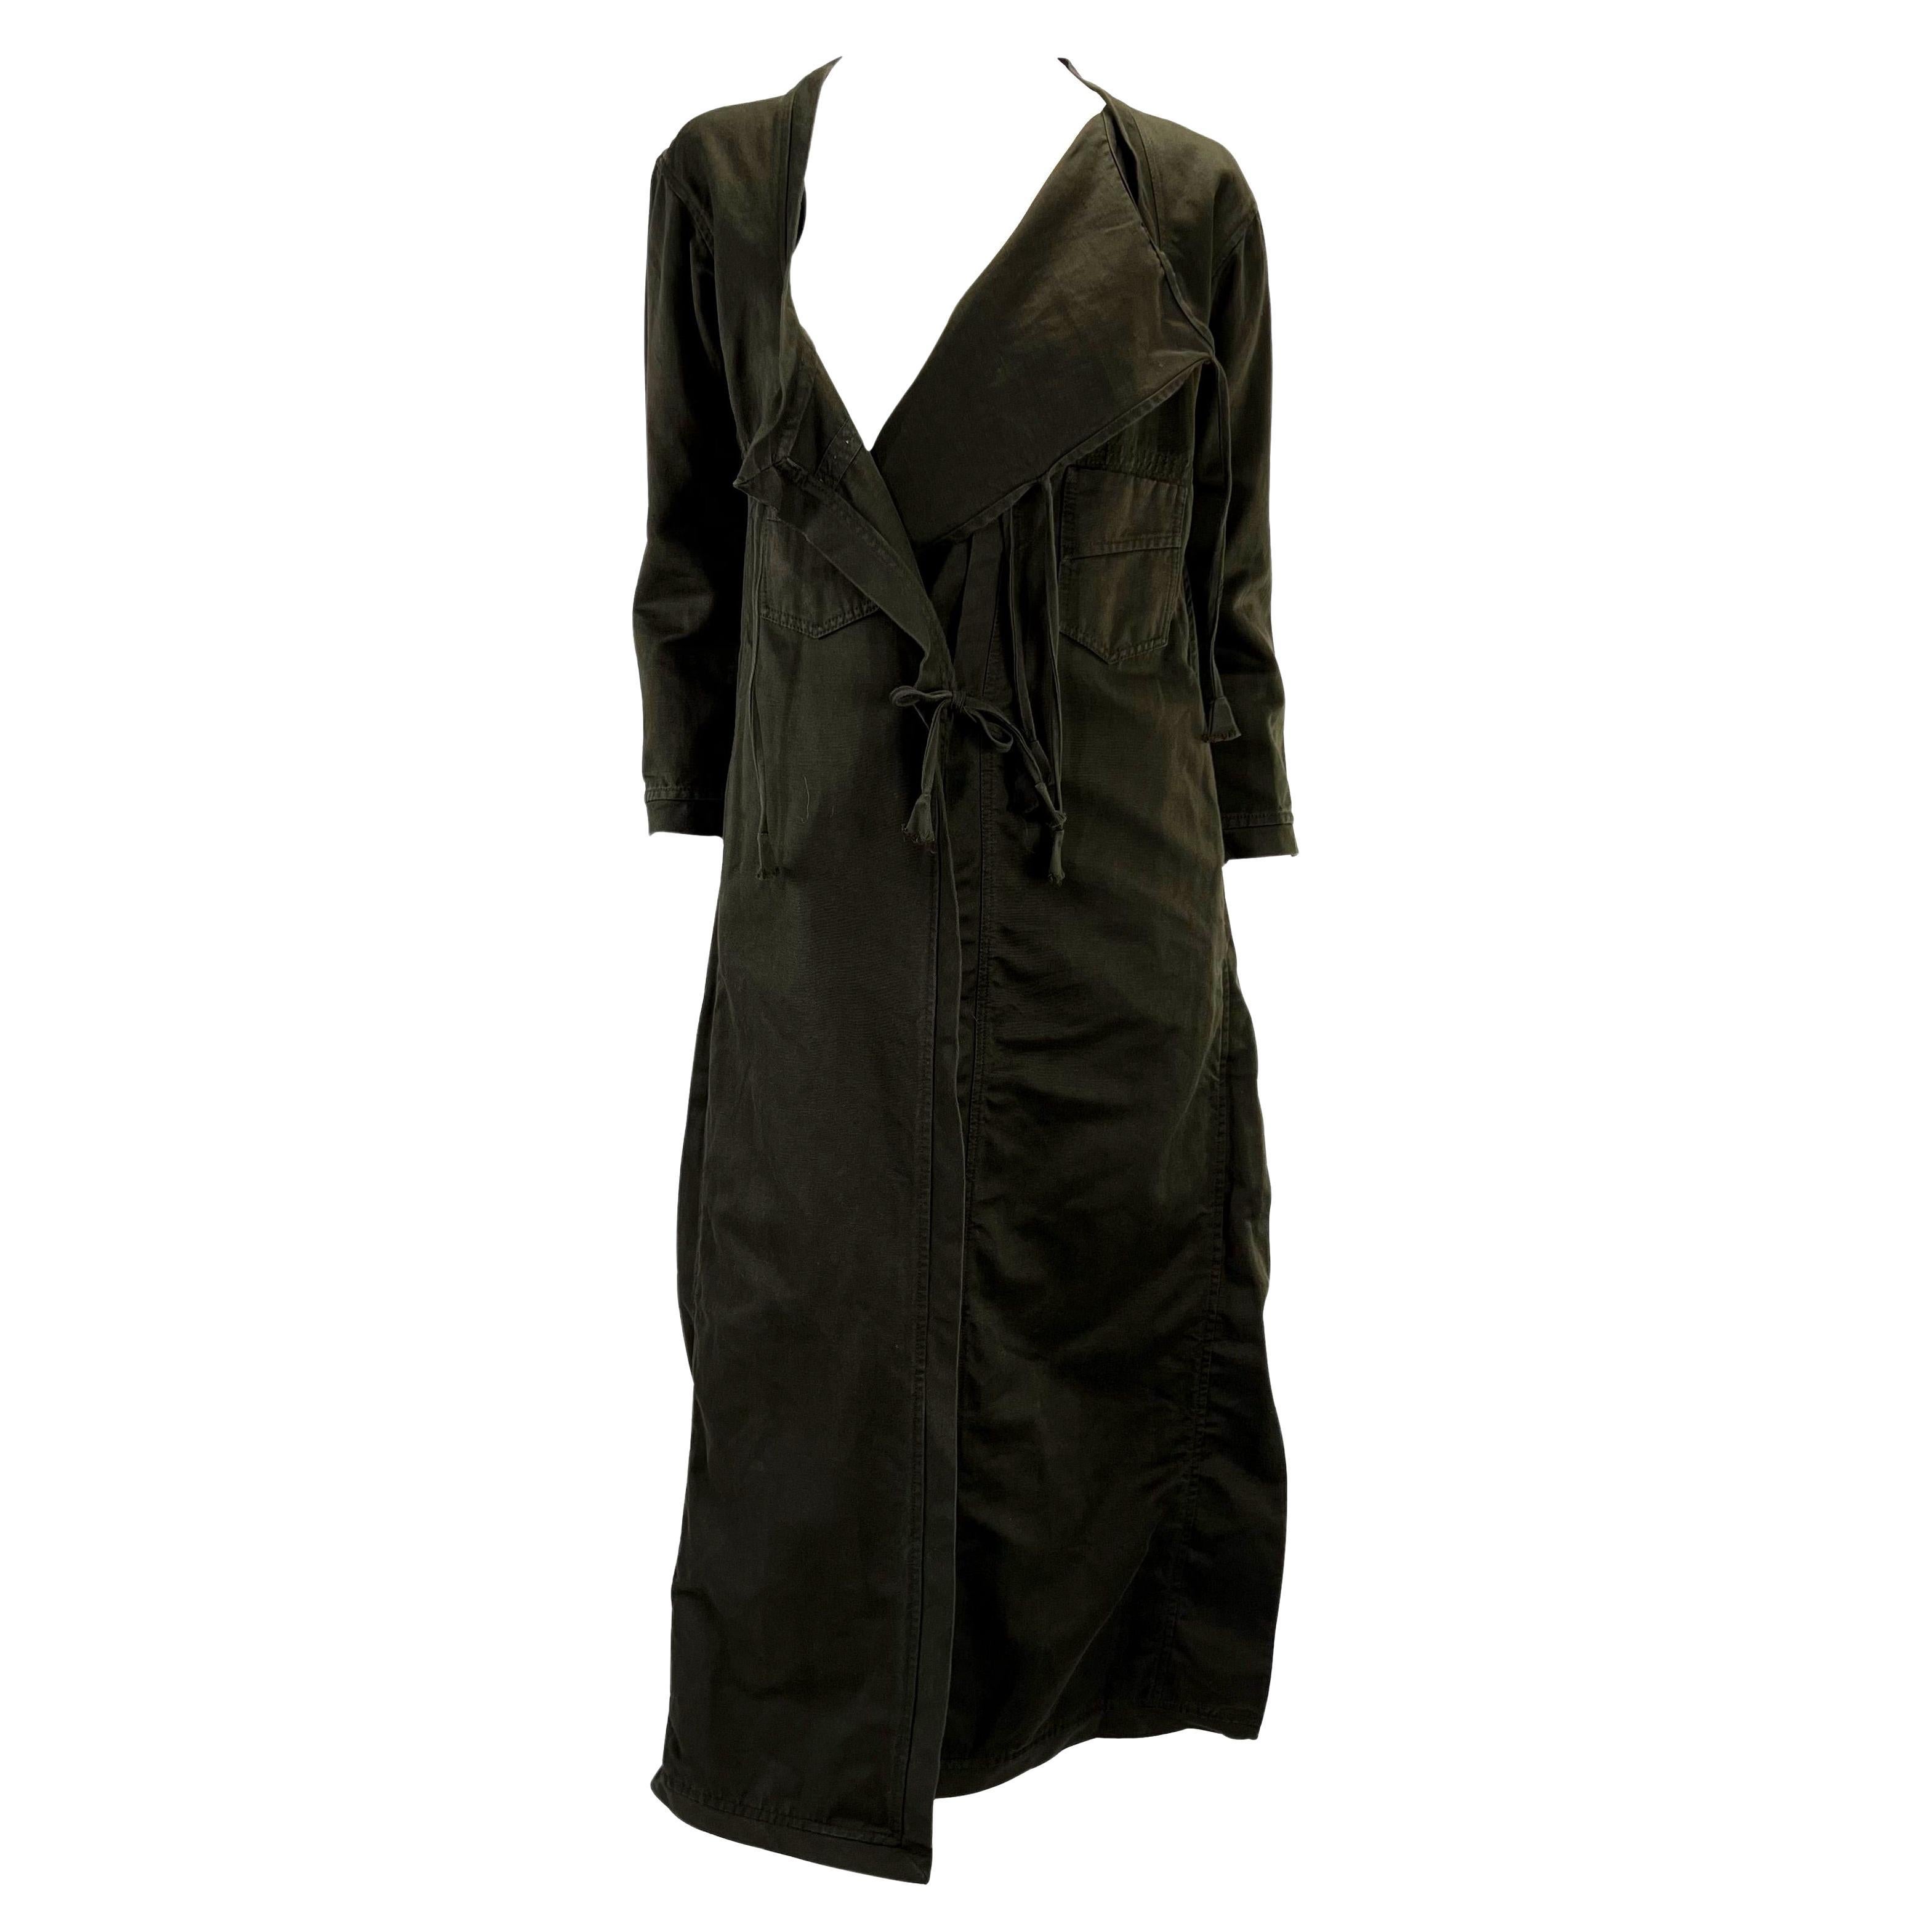 S/S 2002 Gucci by Tom Ford Brown Cotton Oversized Cotton Duster Coat Dress For Sale